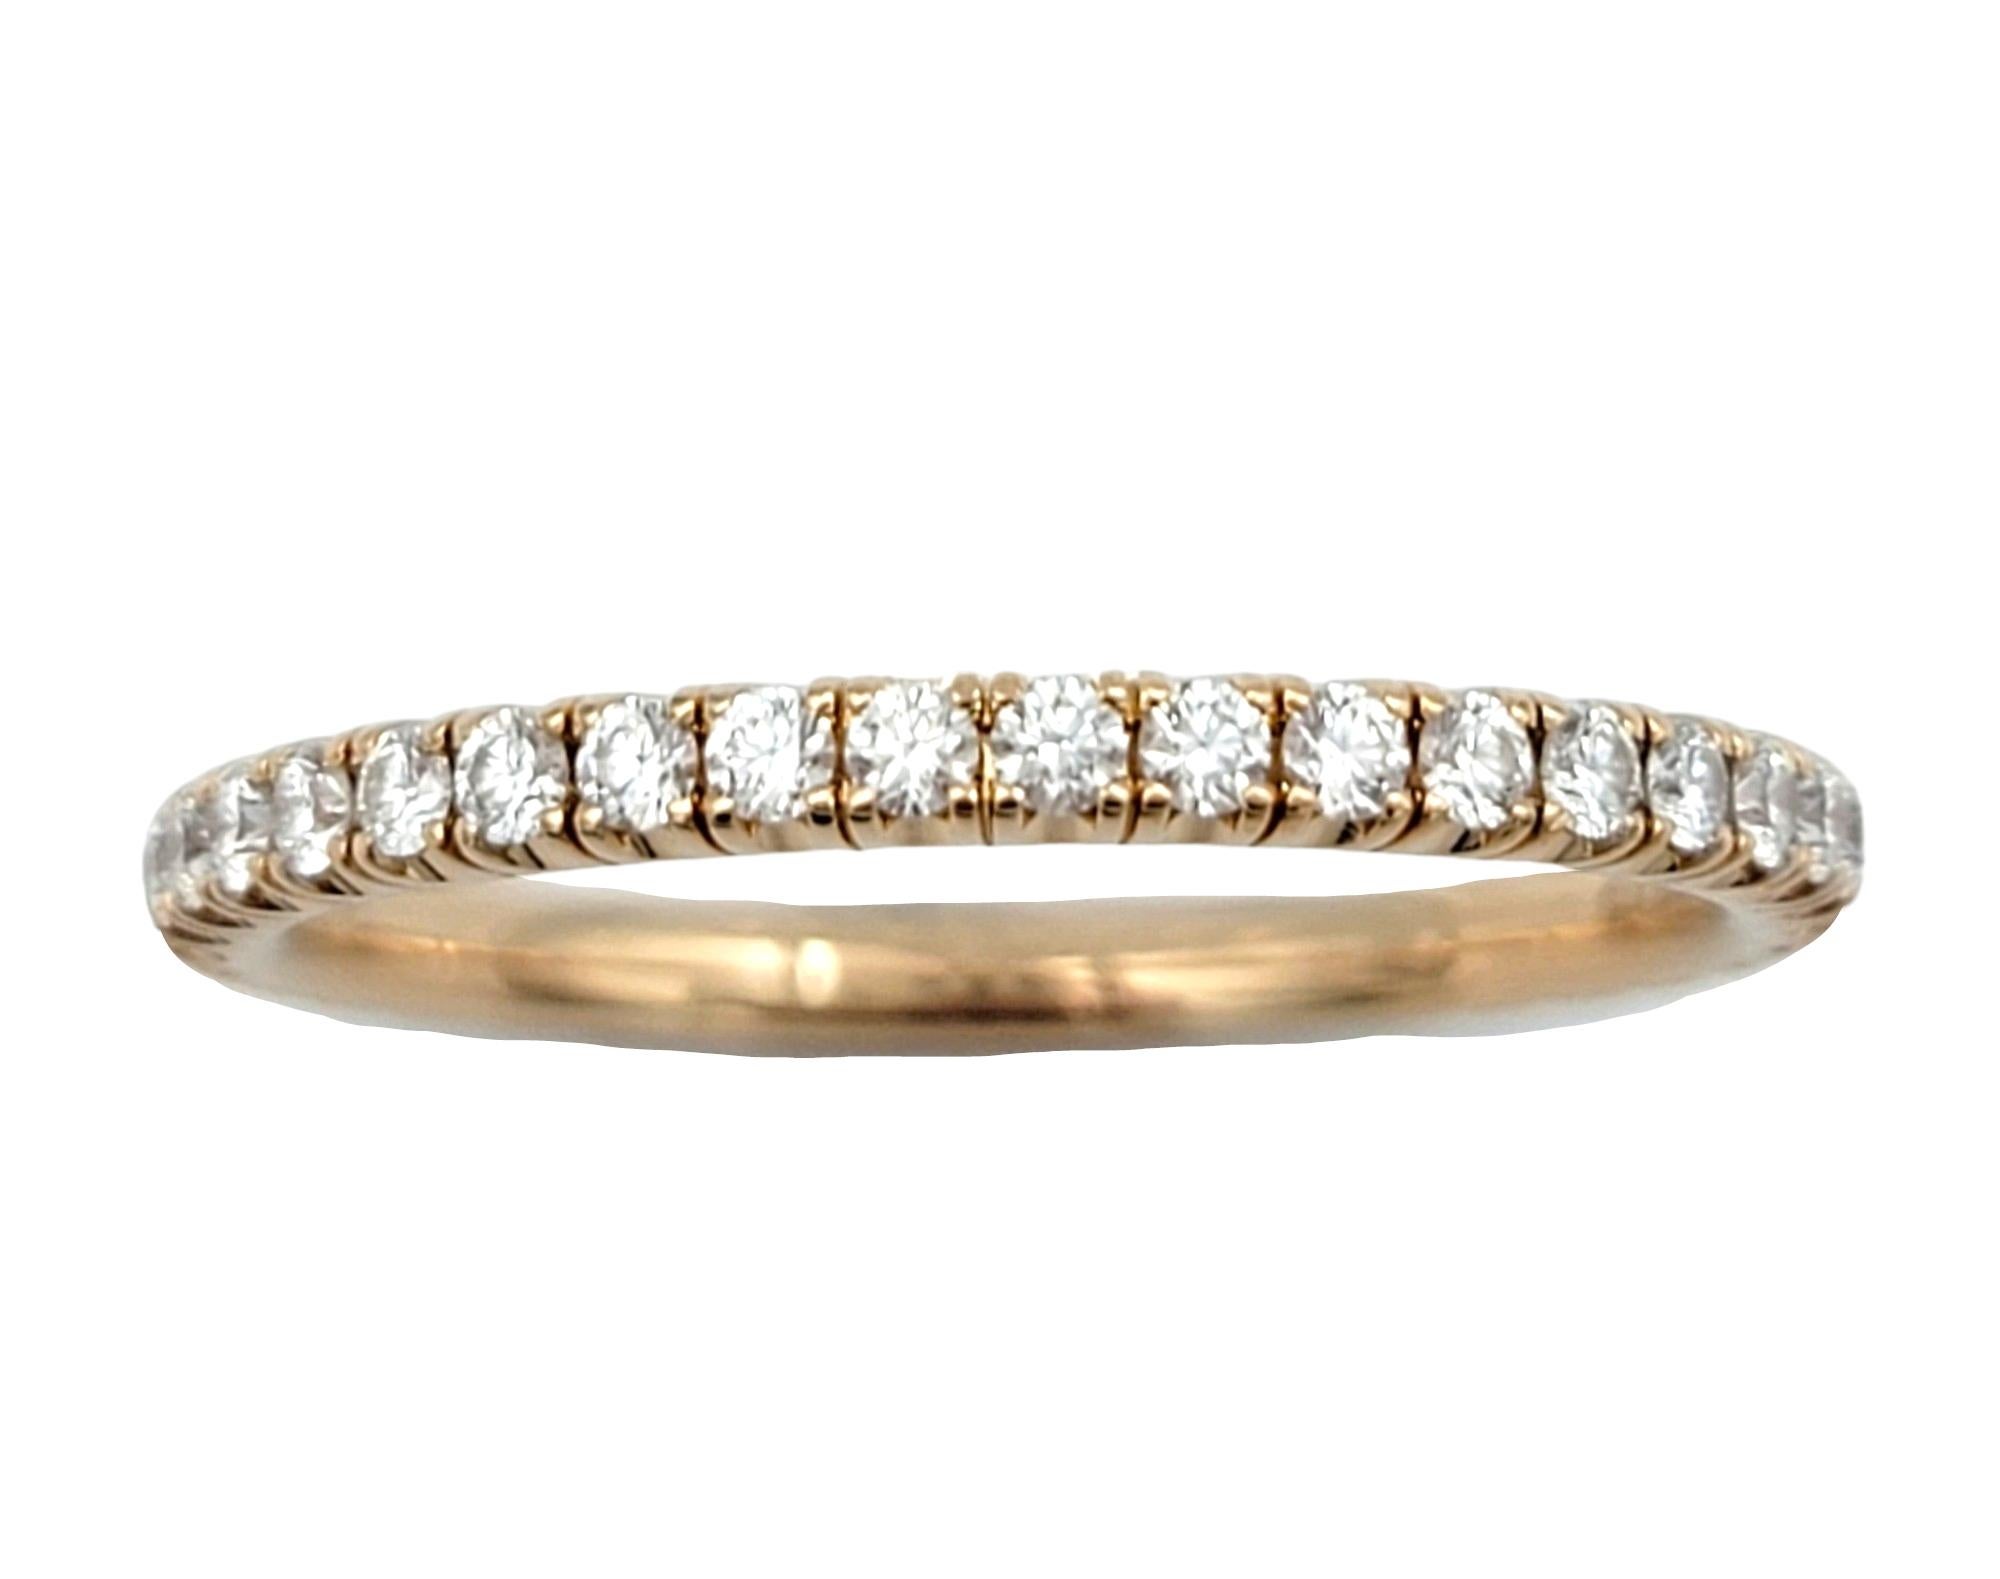 Ring Size: 6.75

This Cartier diamond eternity band ring is a work of art. Crafted from luxurious 18 karat rose gold, the ring features a continuous row of exquisite diamonds encircling the band, creating a mesmerizing display of brilliance and